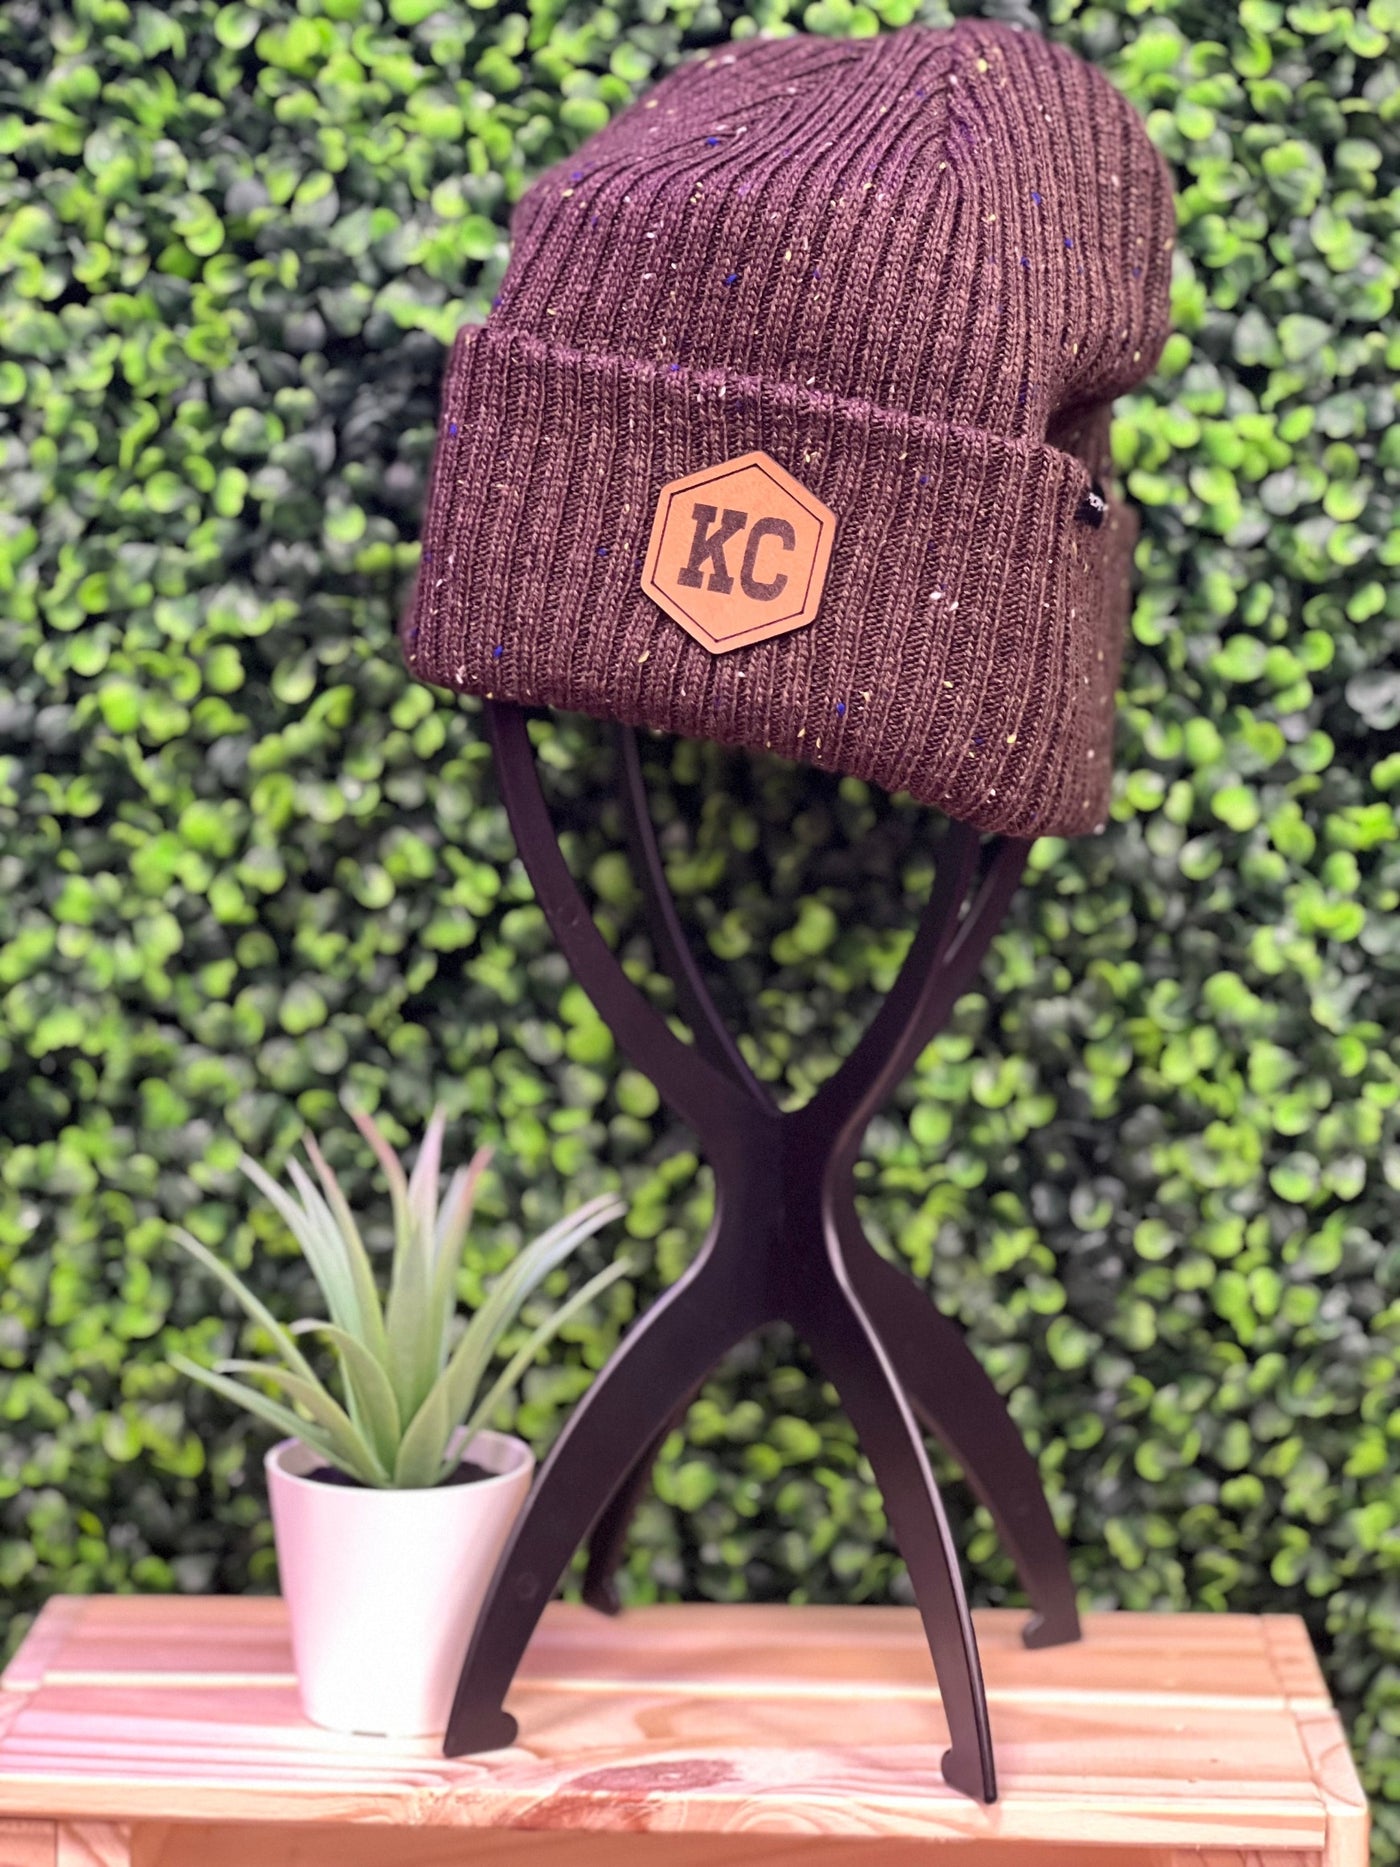 KC Leather Patch Tweed Beanies